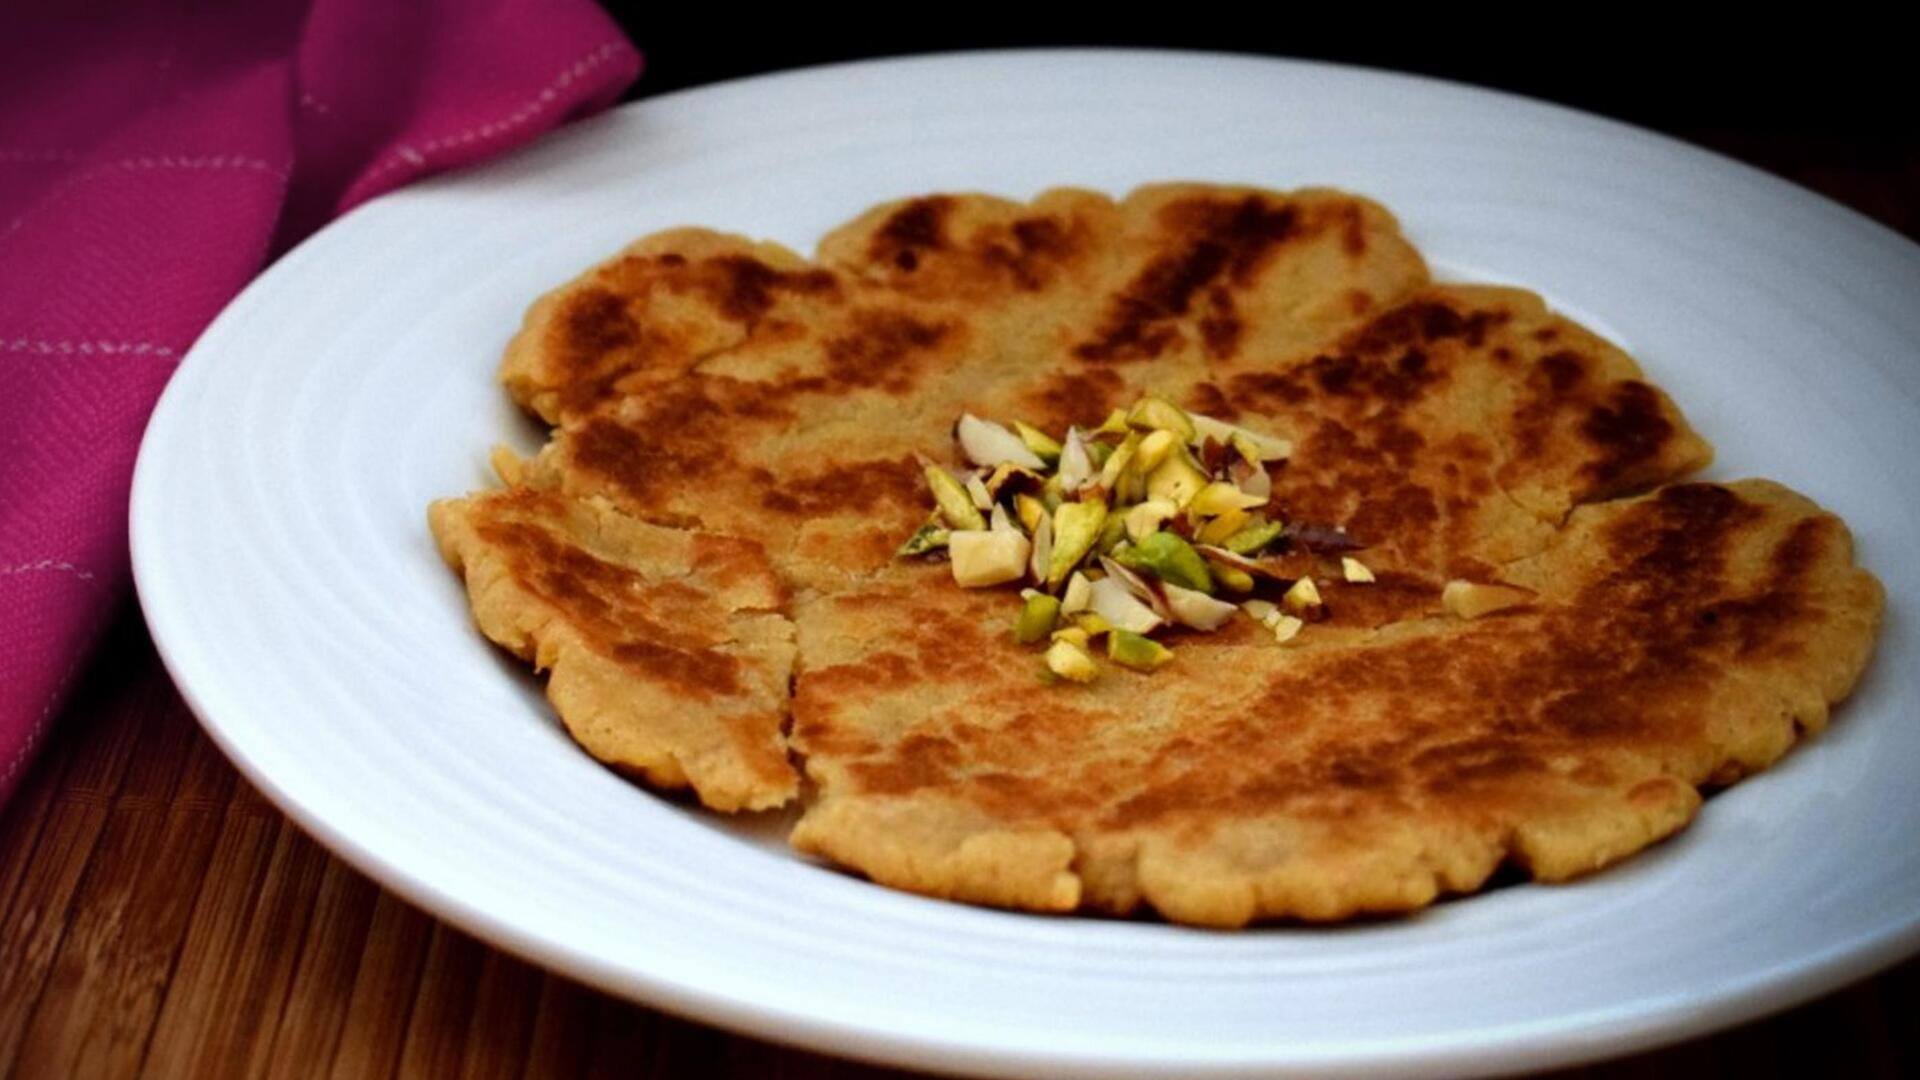 Mothi lolo: A Sindhi dessert loaded with health and nutrients